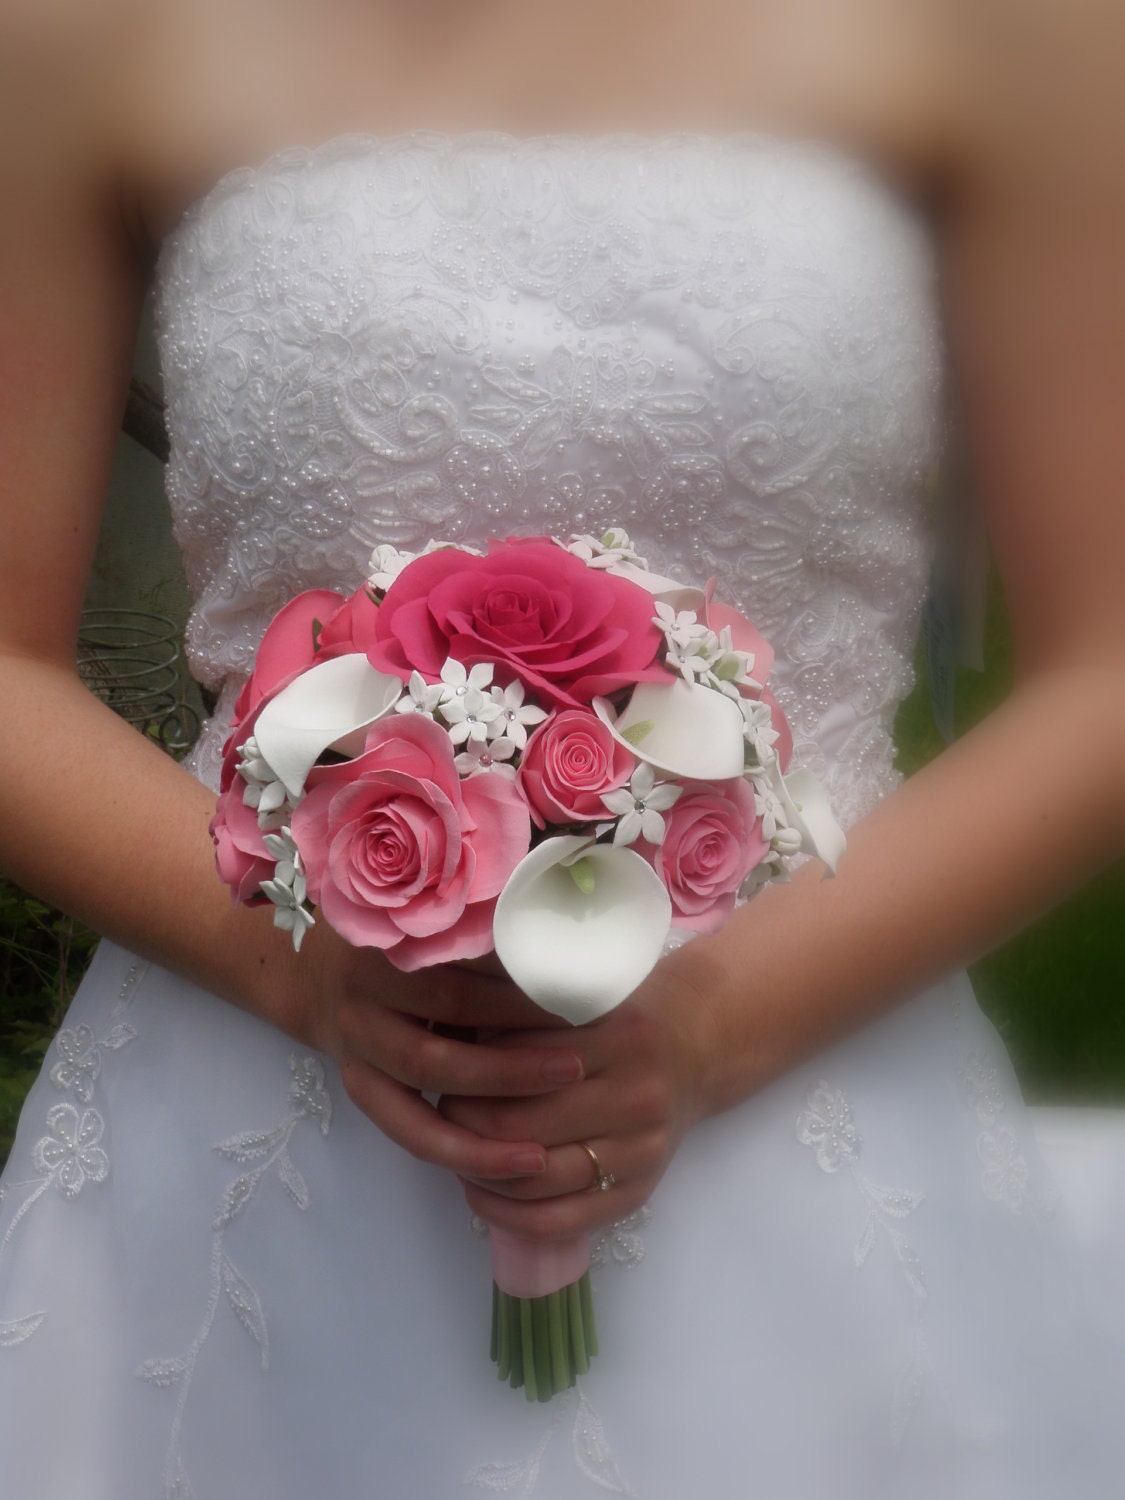 Absolutely elegant bouquet with pink roses, calla lillies and stephanotis flowers